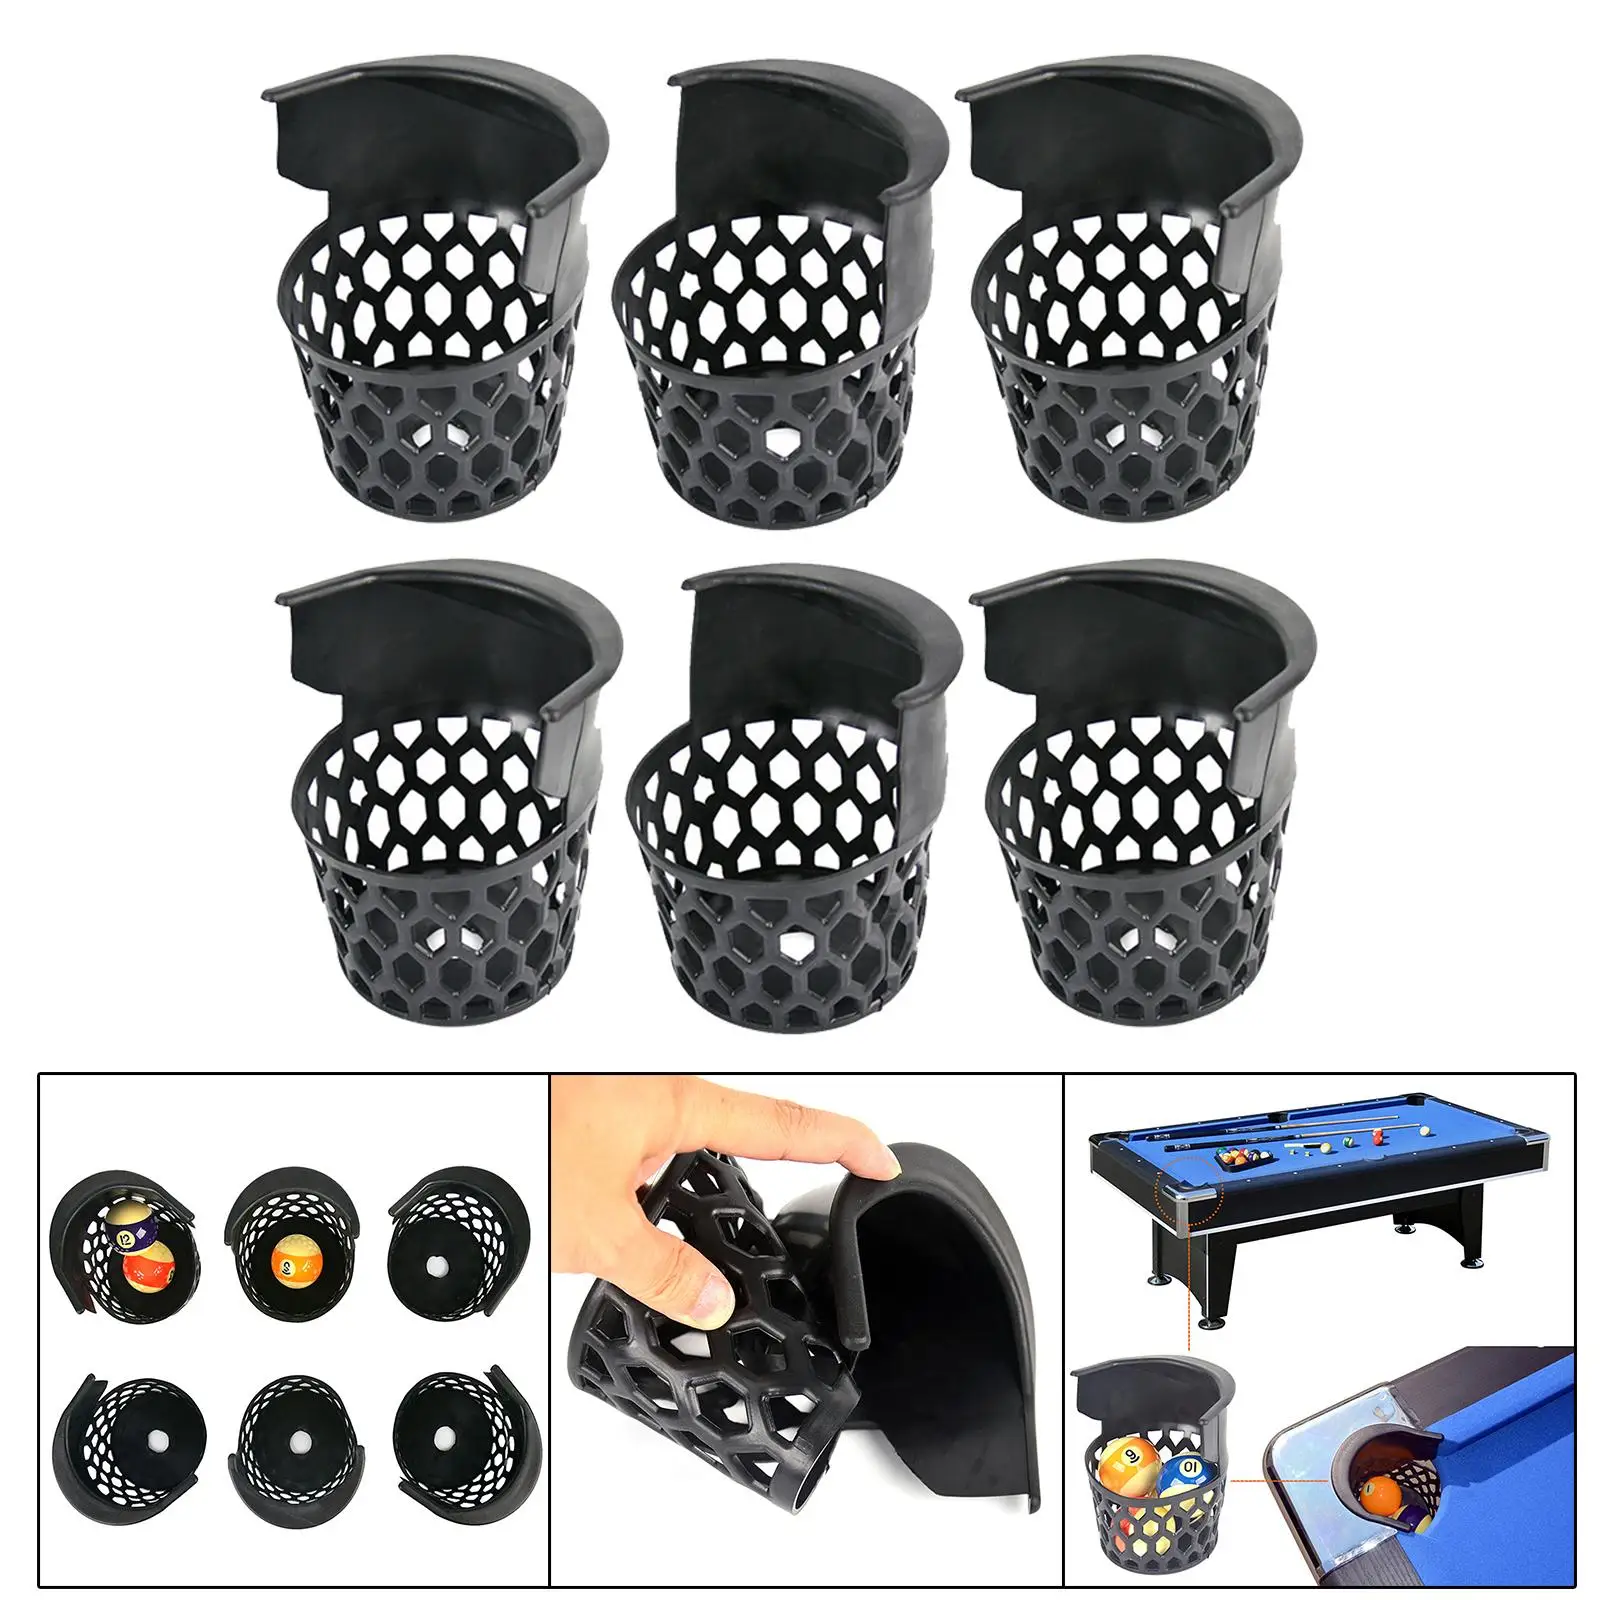 6 Pieces Pool Table Billiard Pockets Set Premium Pool Table Accessories Storage with 12 Screws Heavy Duty Easy Clean Web Pocket